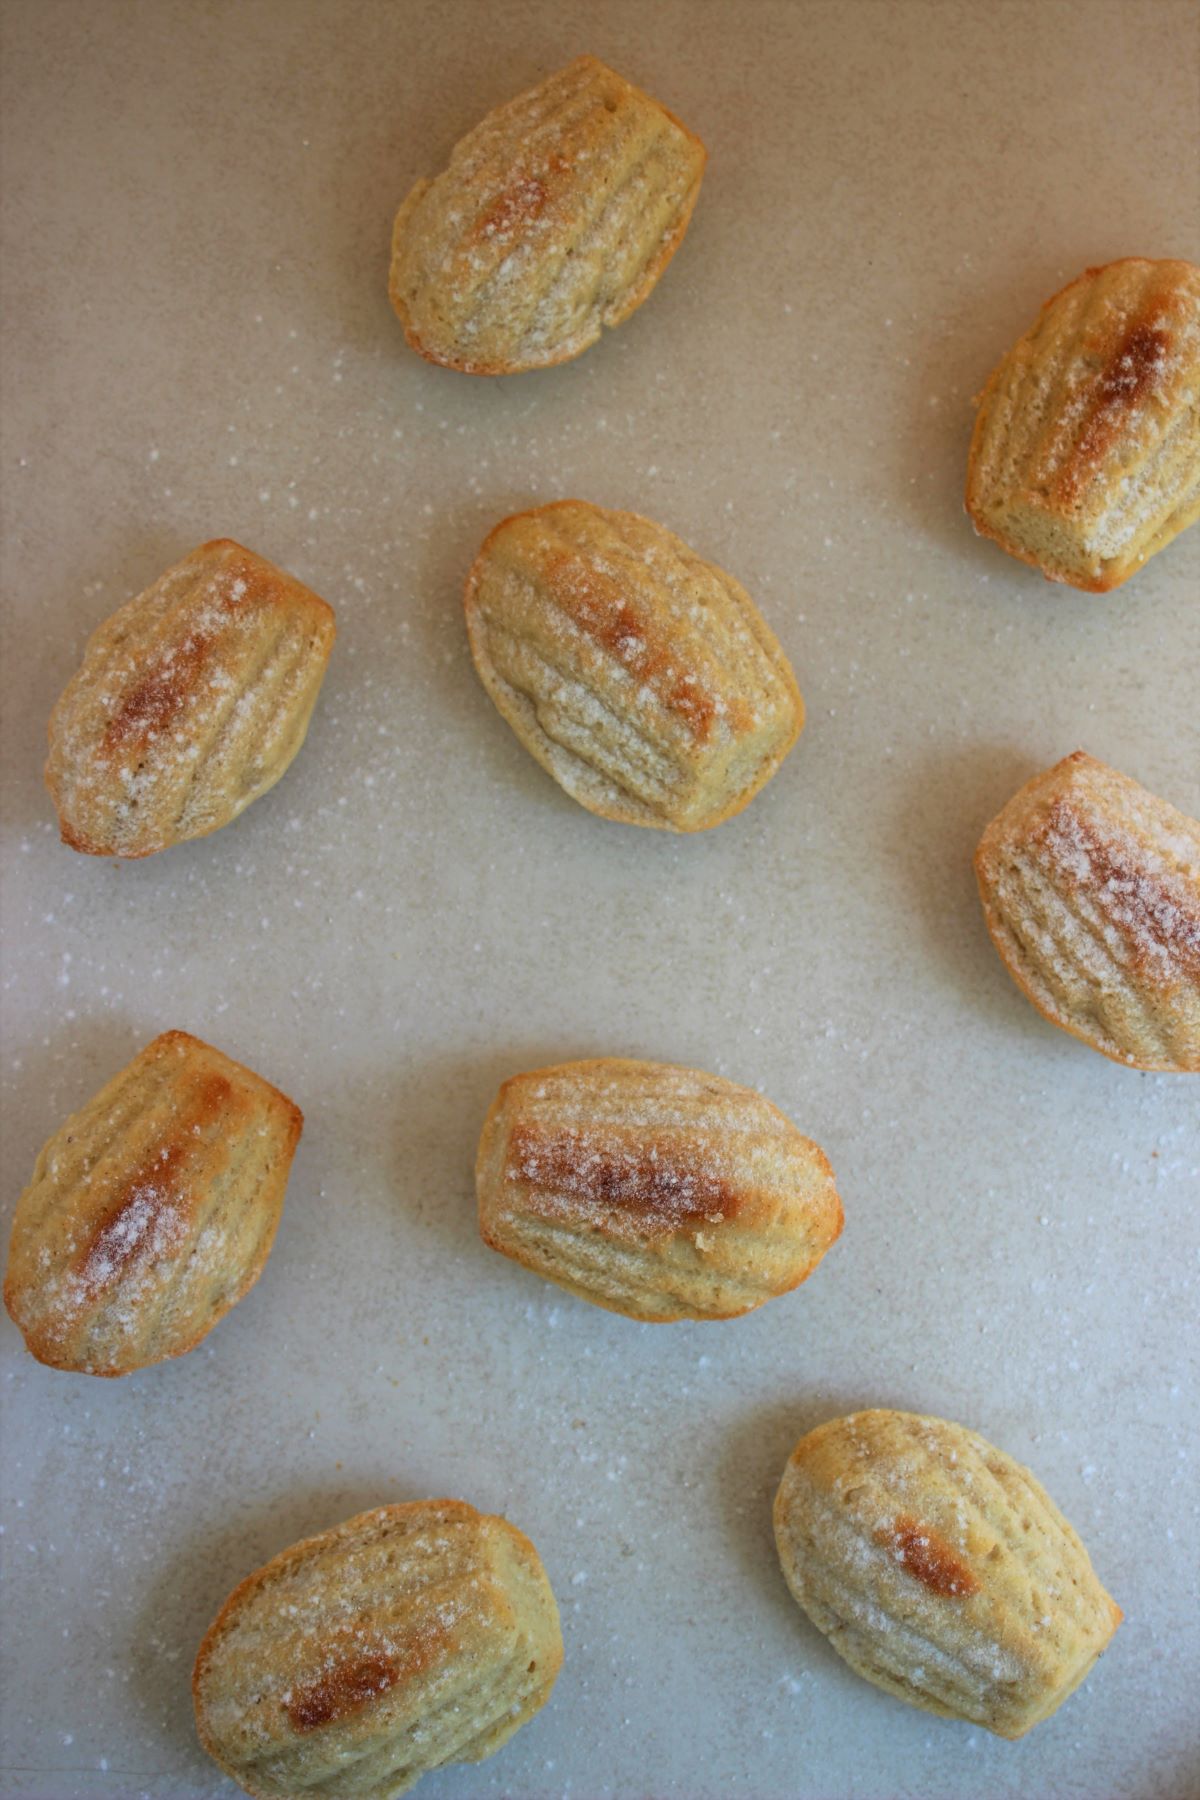 Many madeleines on a white surface seen from above.